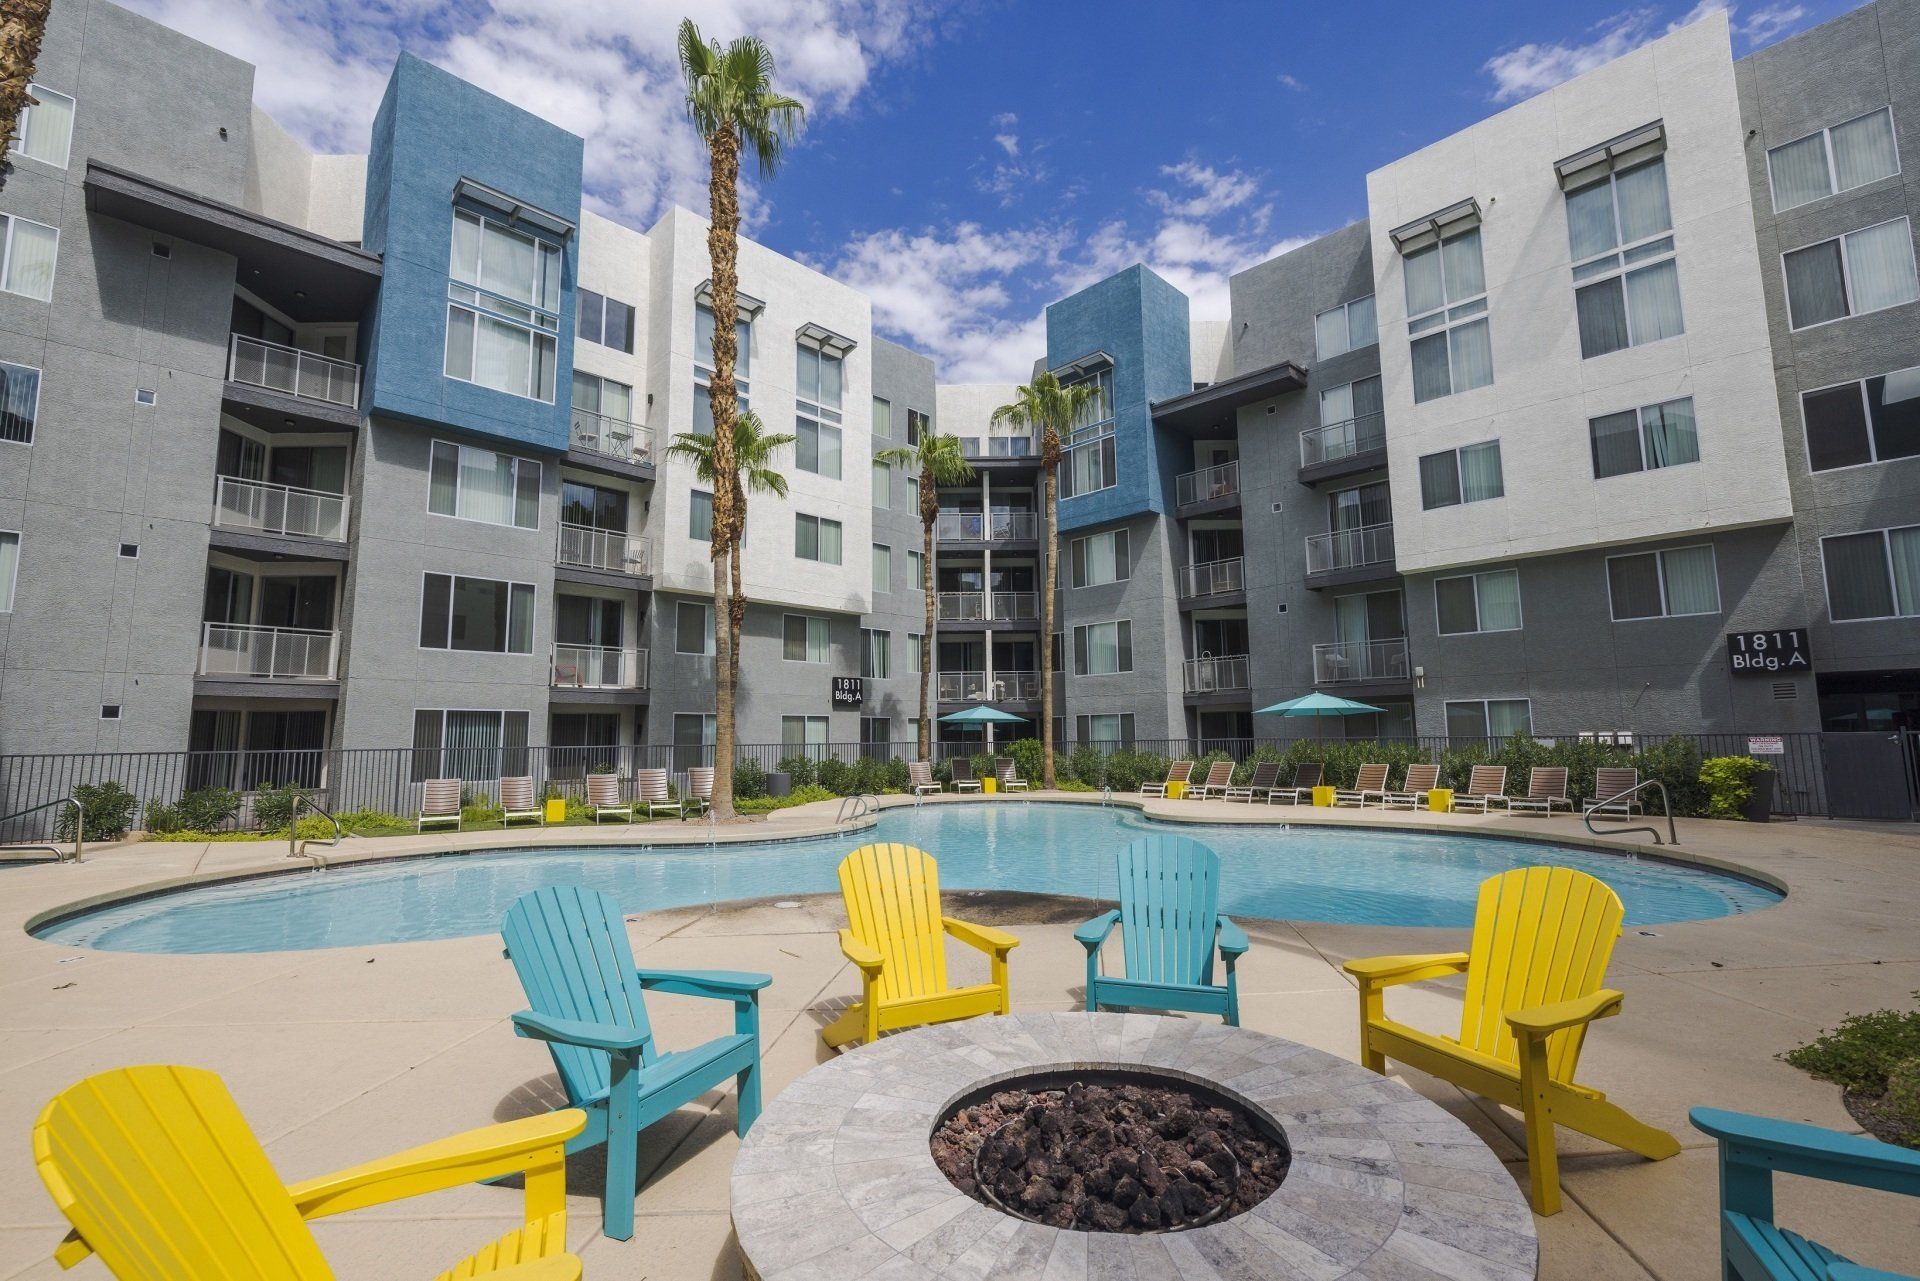 American Landmark Expands into Phoenix with Acquisition of Apartments Near Arizona State University